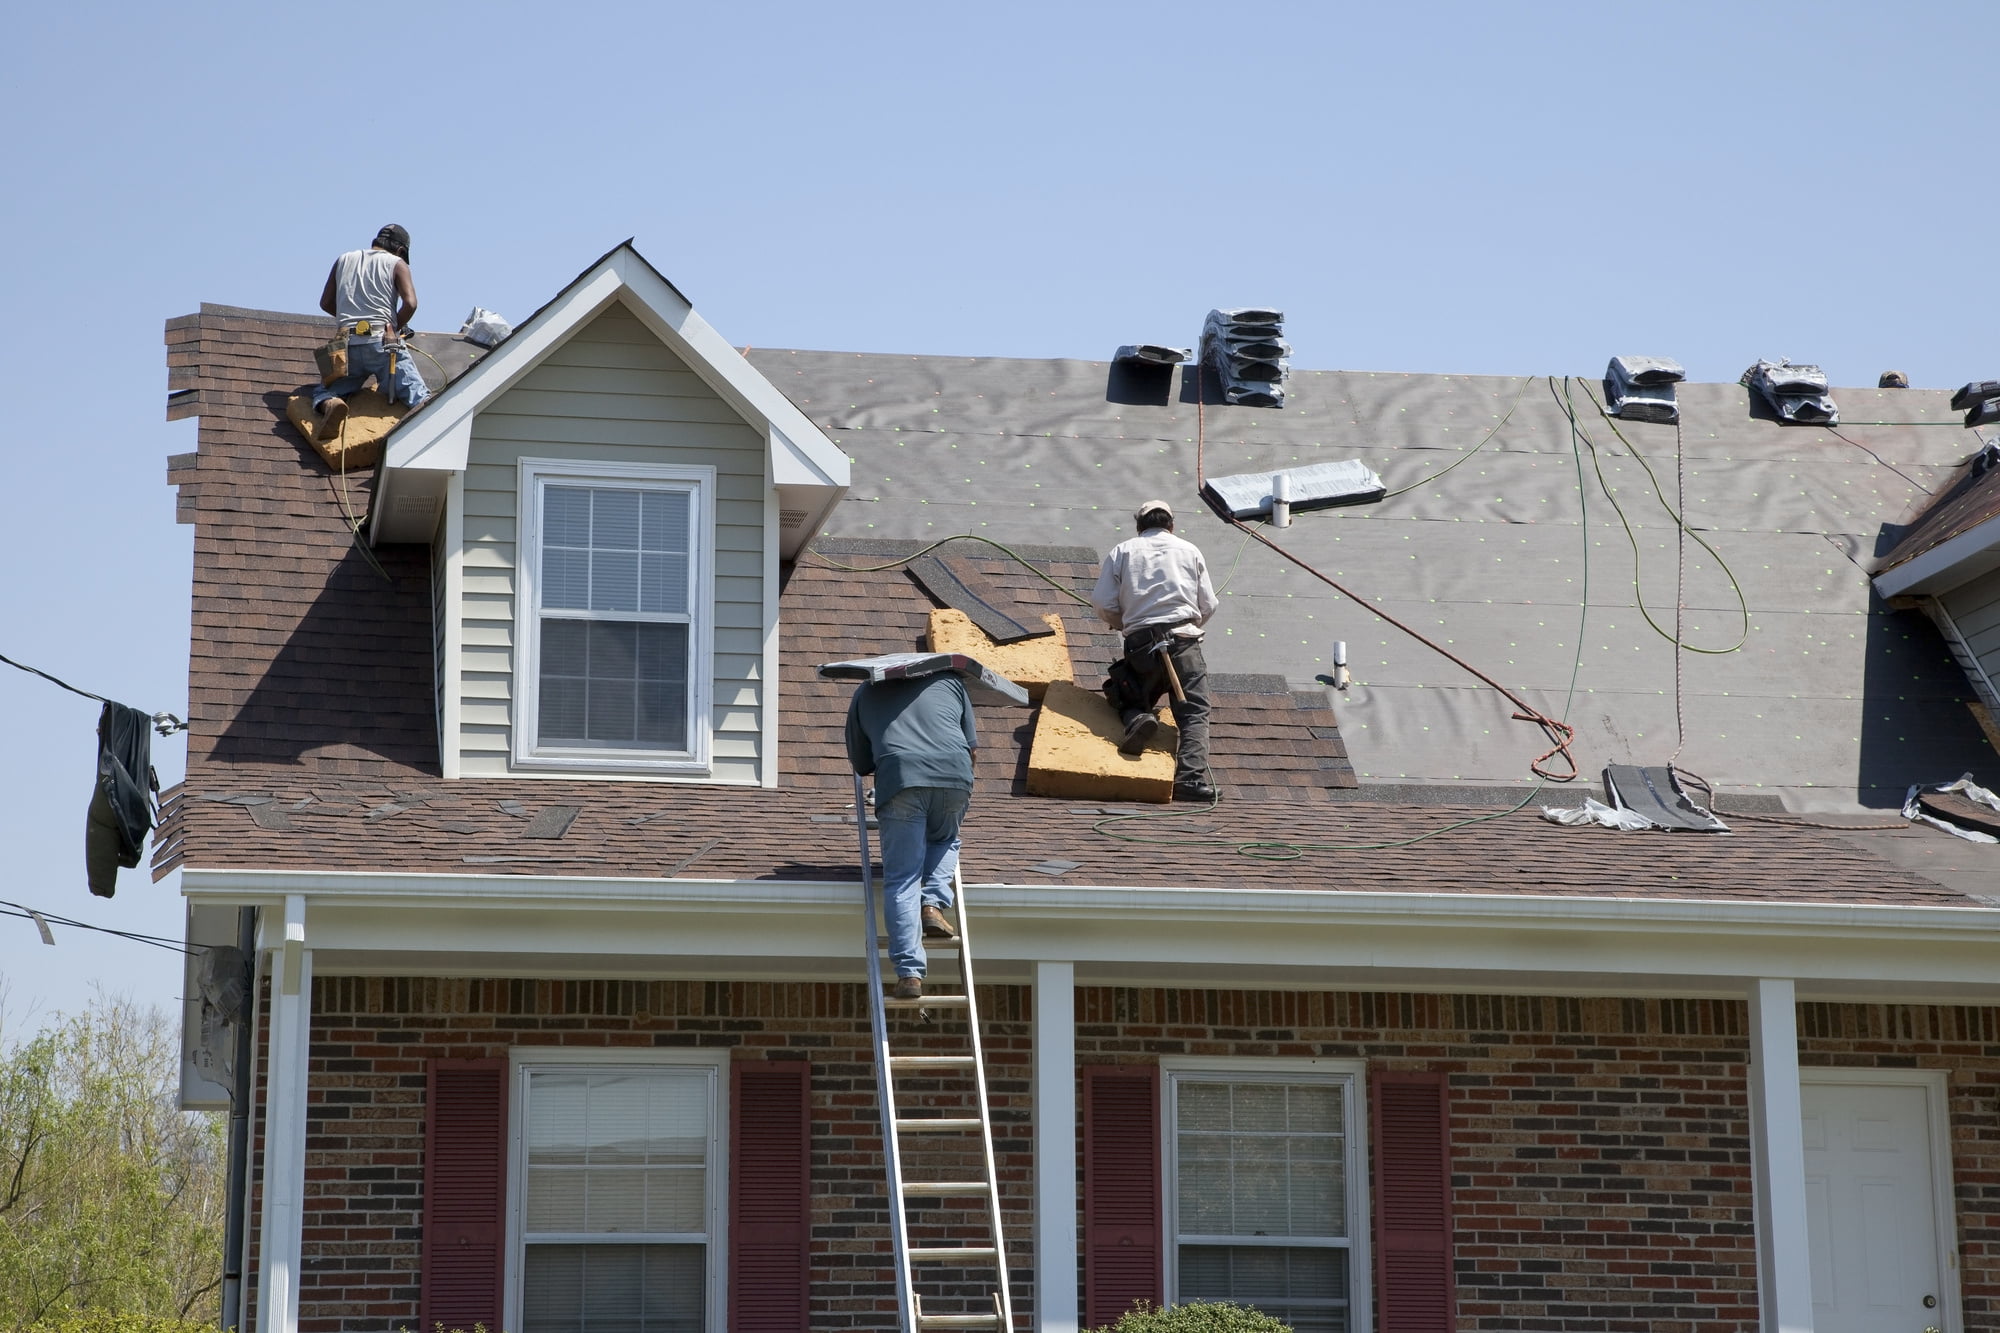 A residential roofing contractor can ensure your roof's in good shape, but only if you hire the right one. Learn how to choose here.